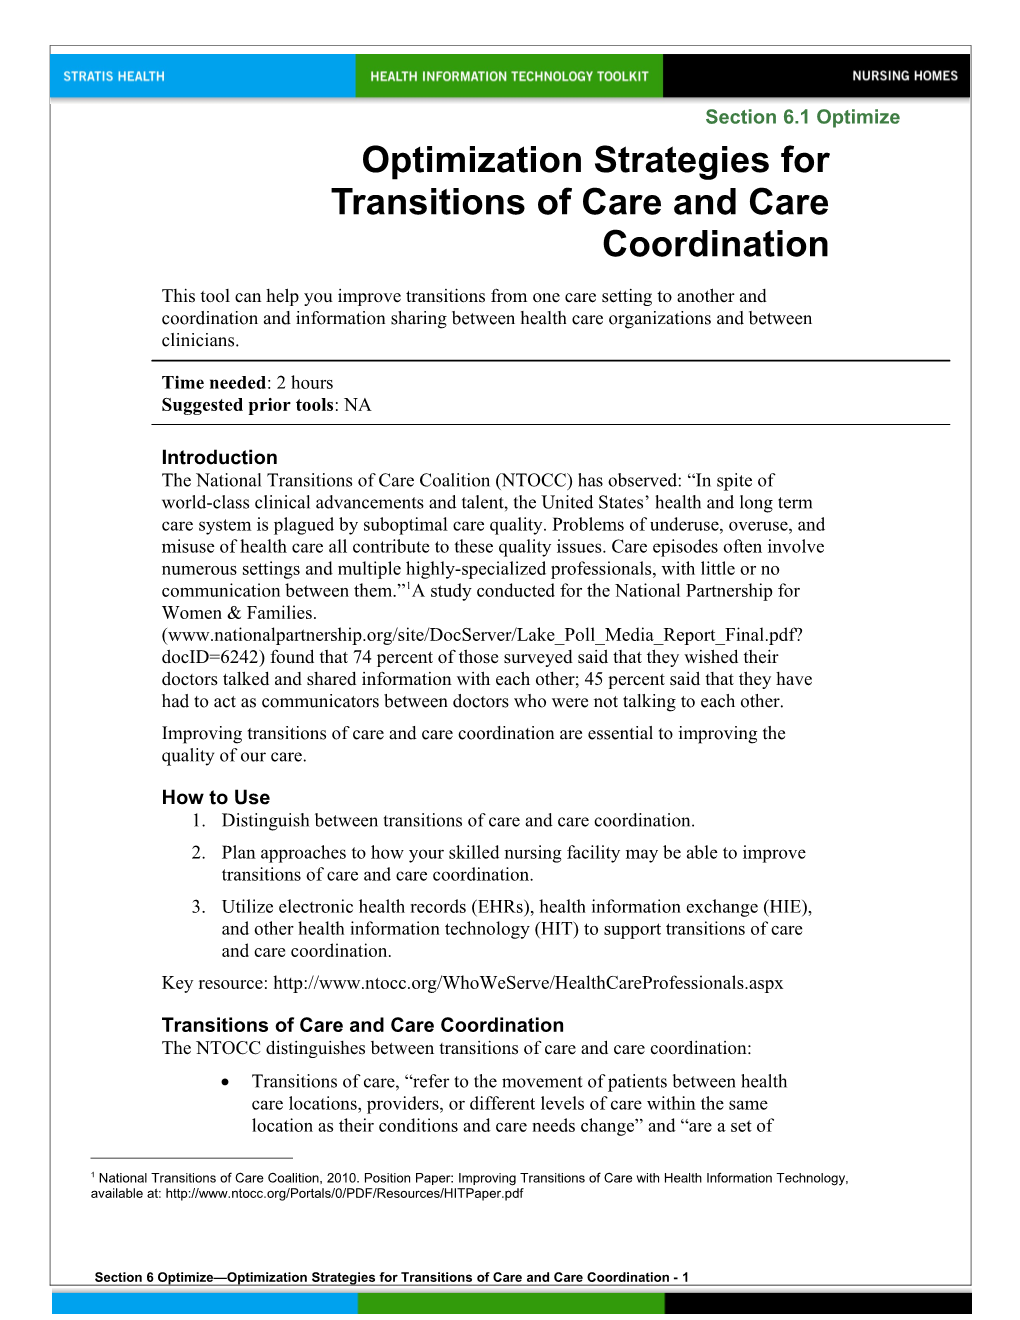 6 Optimization Strategies for Transitions of Care and Care Coordination